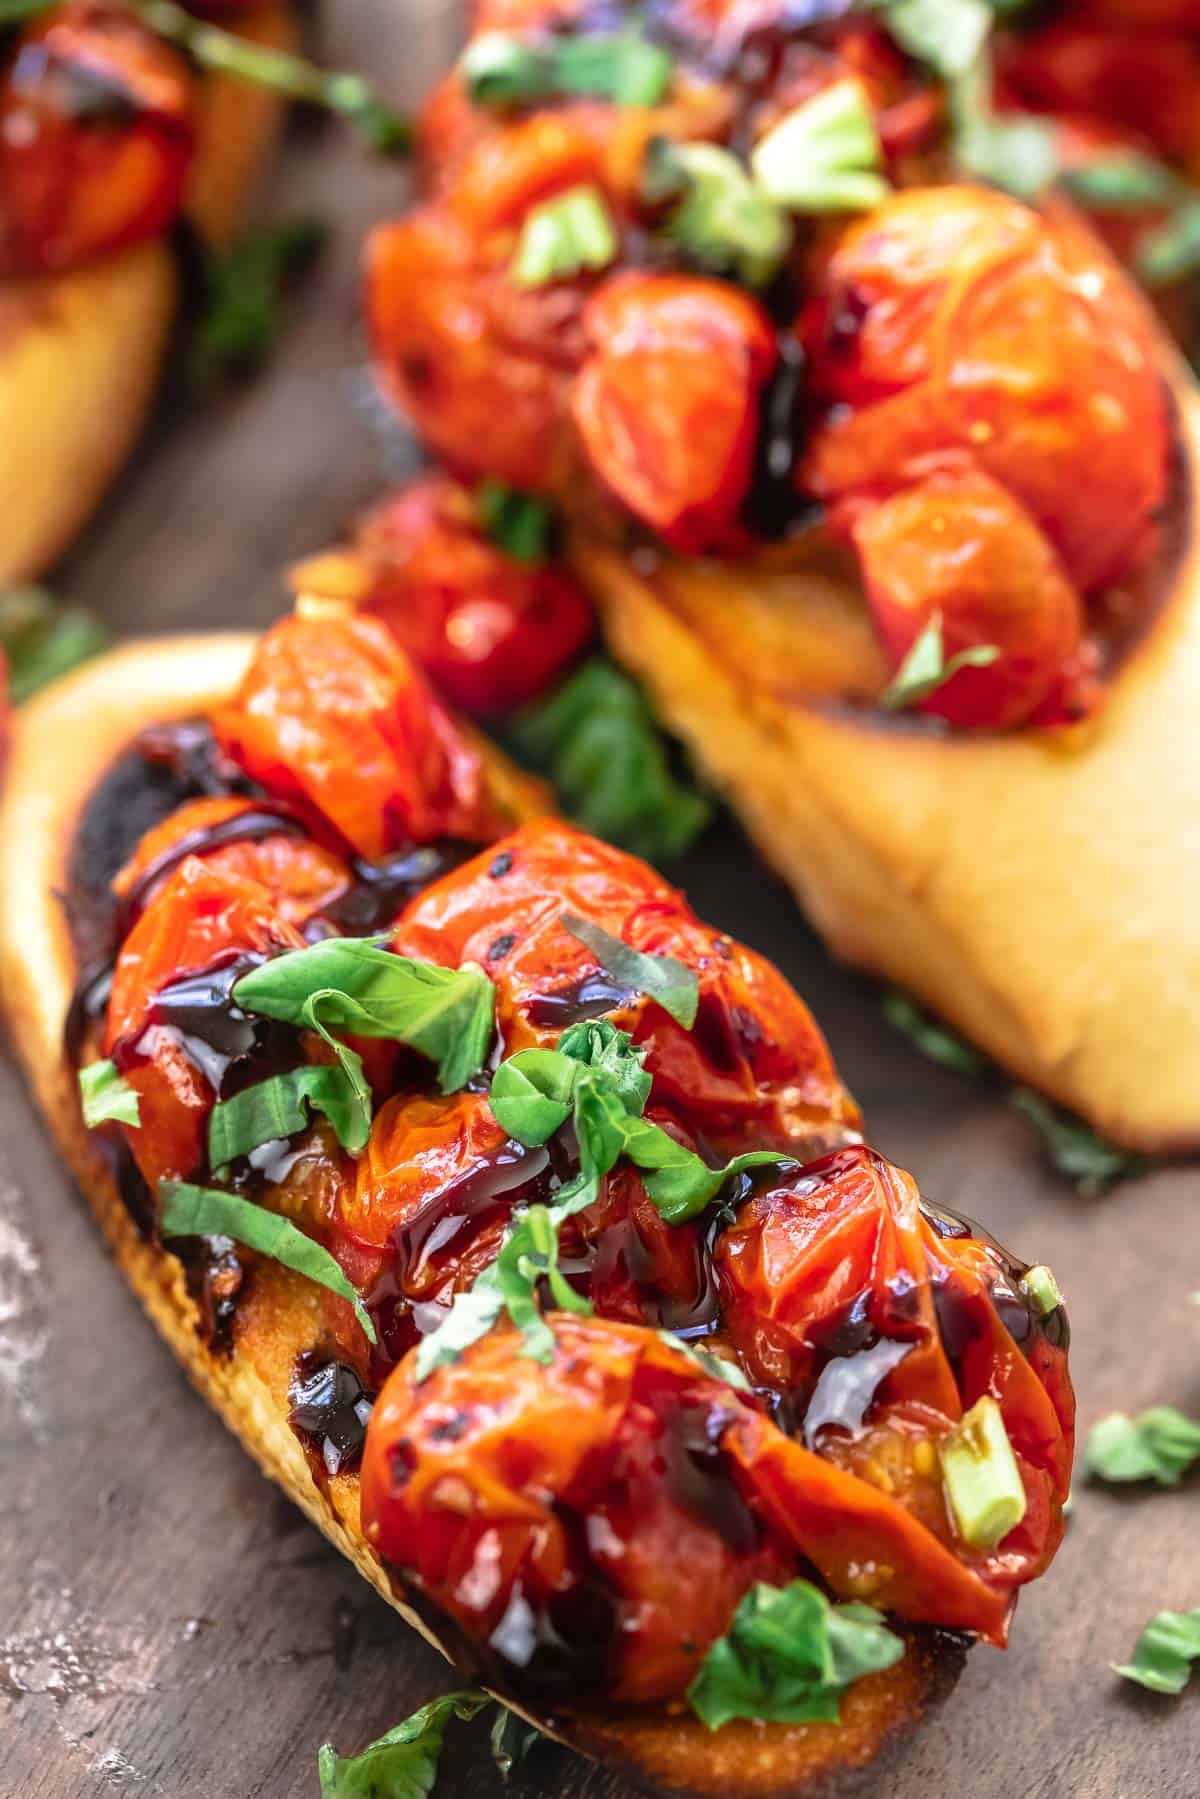 sliced toasted baguette with blistered tomatoes, balsamic glaze, and fresh basil (bruschetta)